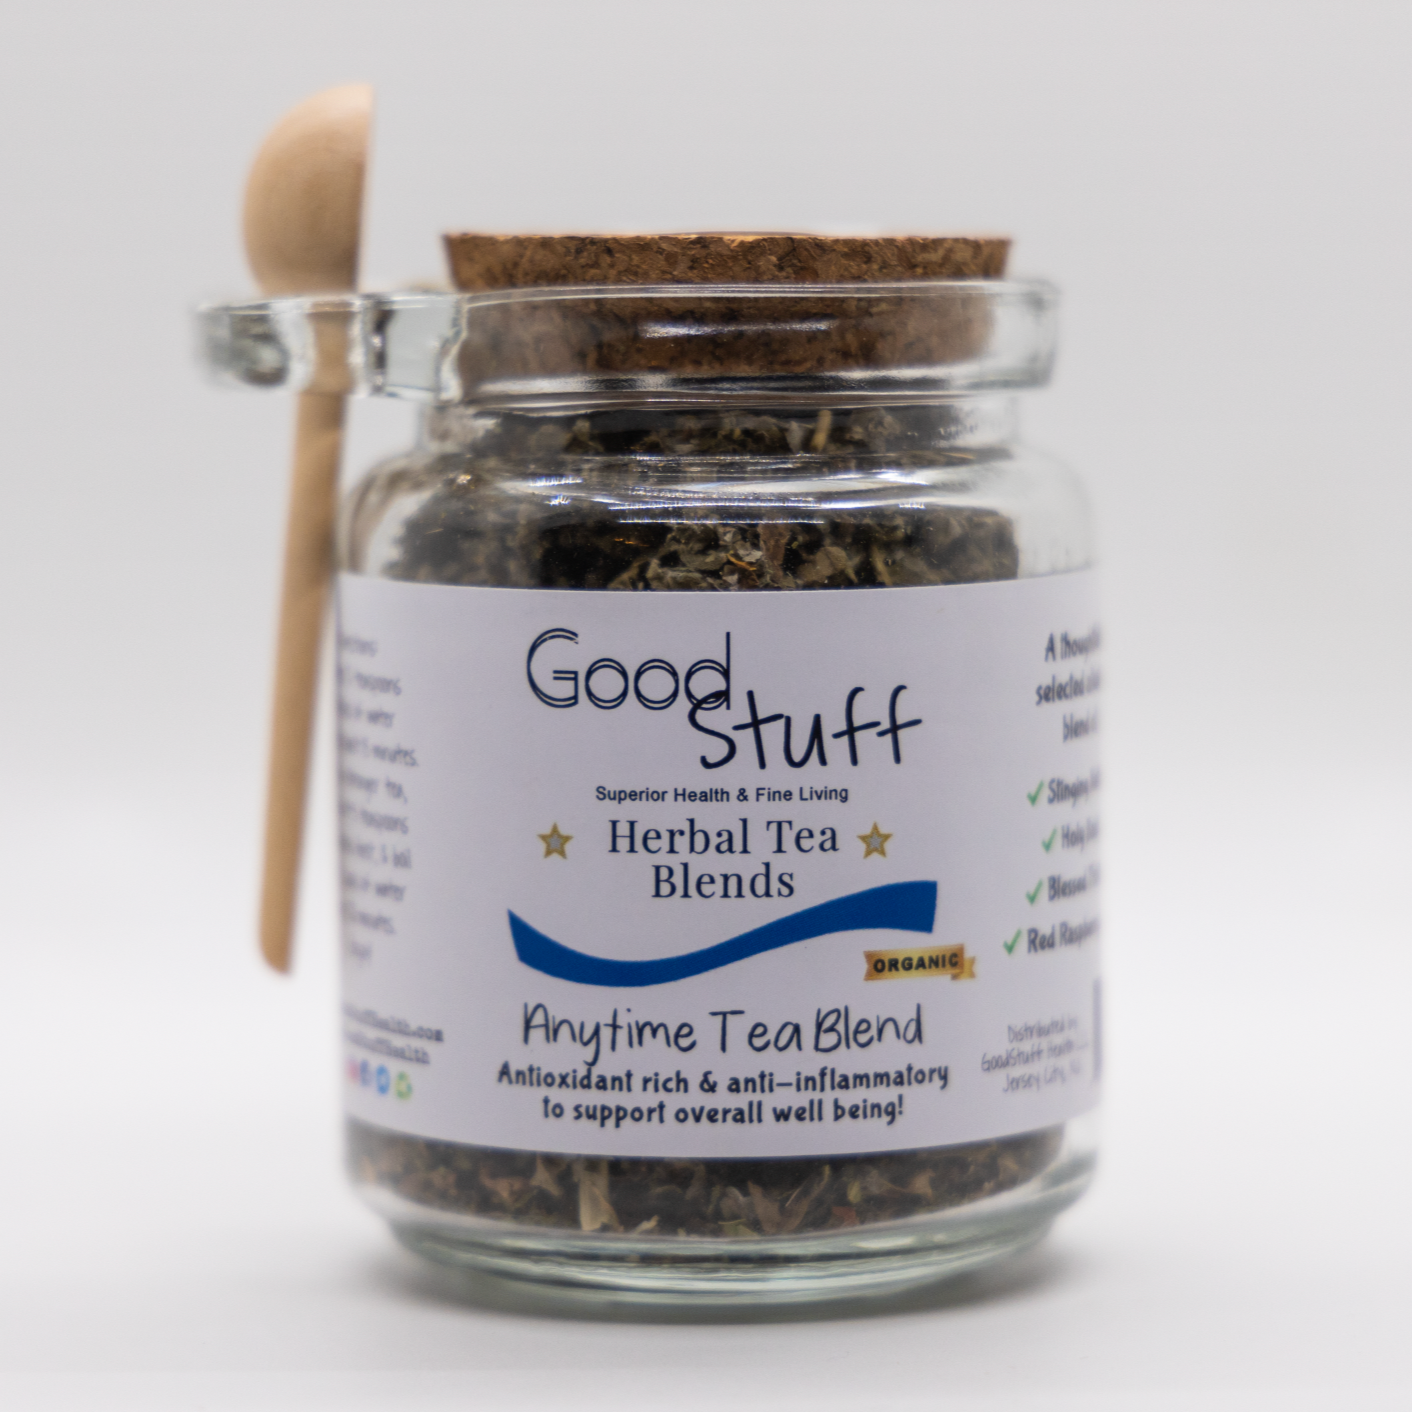 Glass jar including a wooden spoon full of an anytime herbal blend made from Red Raspbery Leaf, Holy Basil, Stinging Nettle, and Blessed thistle. All alkaline, organic, electric, and vegan. 